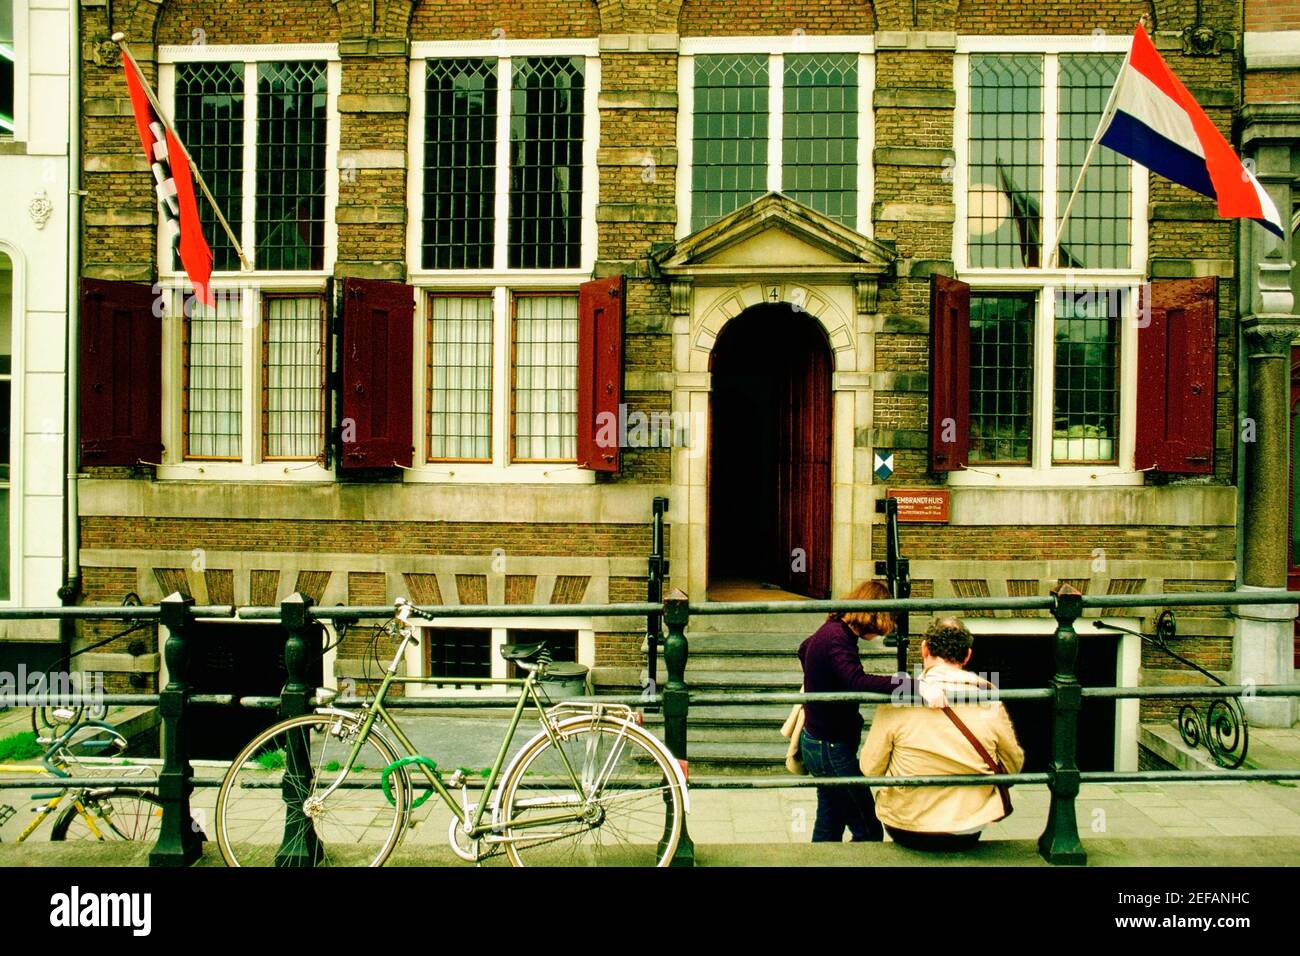 Facade of a museum, Rembrandt House Museum, Amsterdam, Netherlands Stock Photo